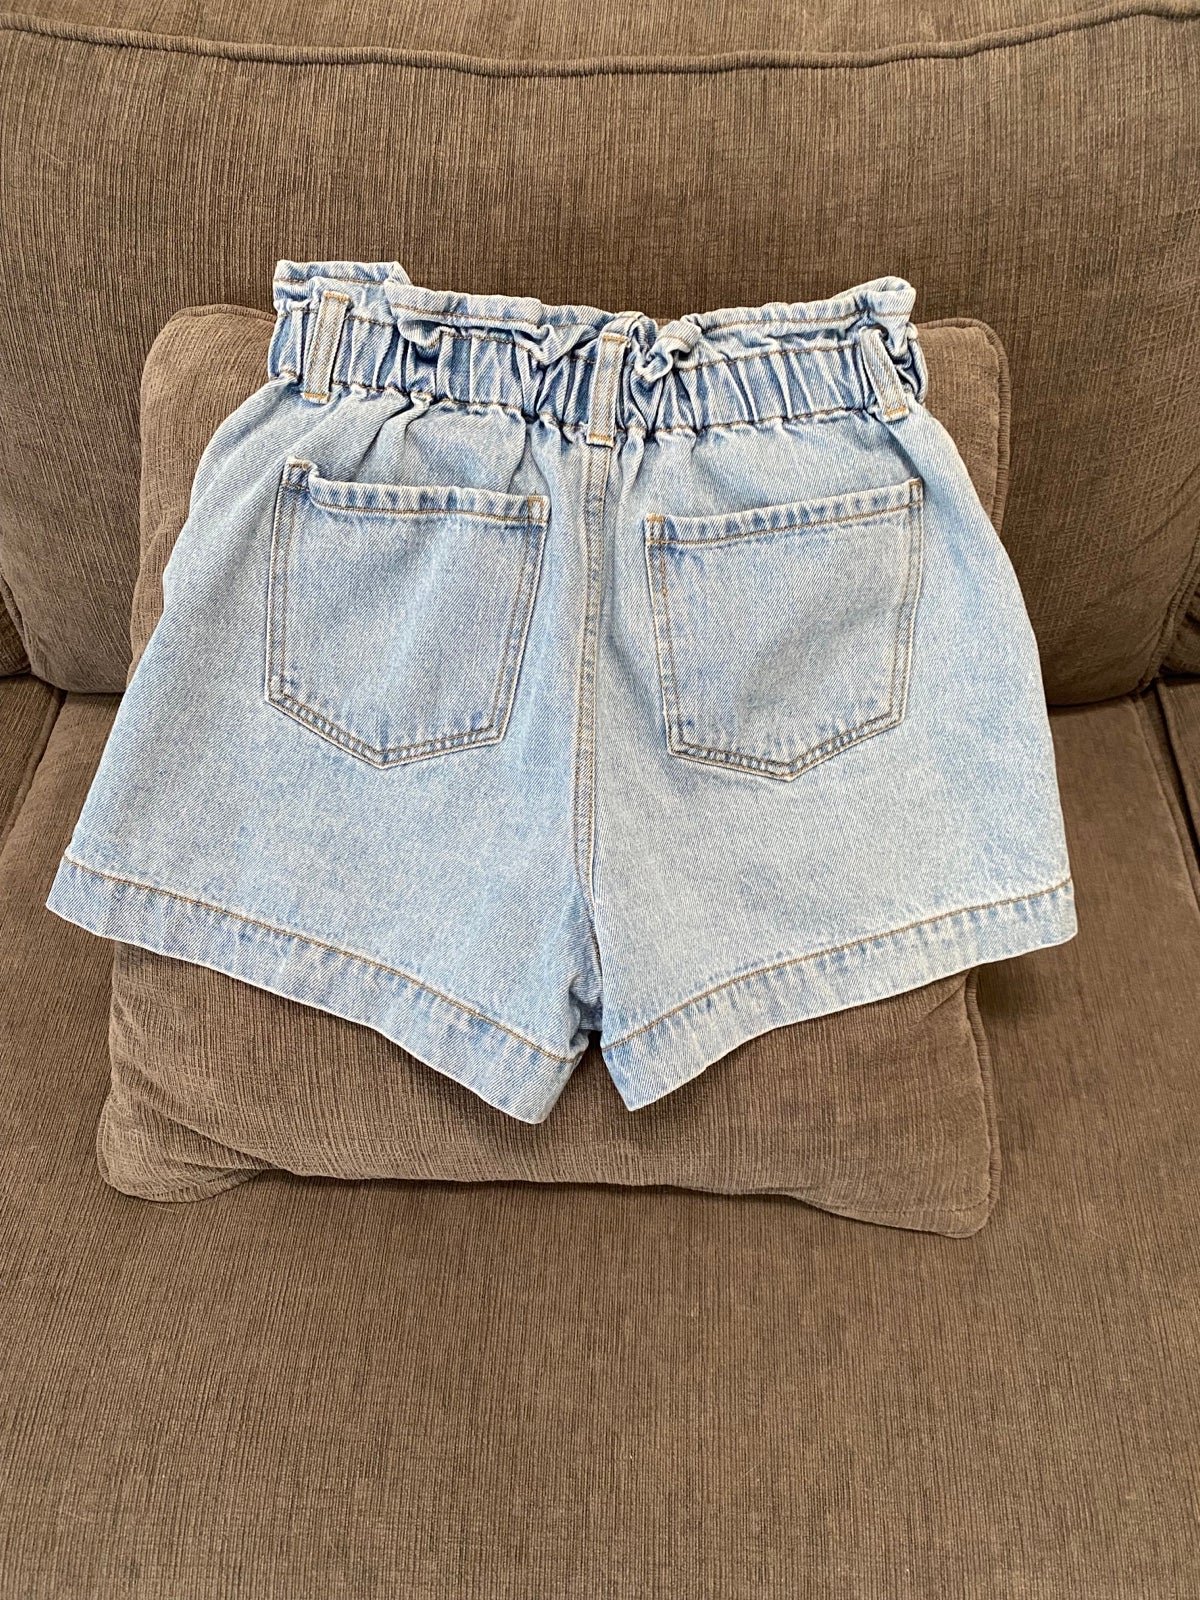 Great Jean short high waisted nWduTBgsN Everyday Low Prices